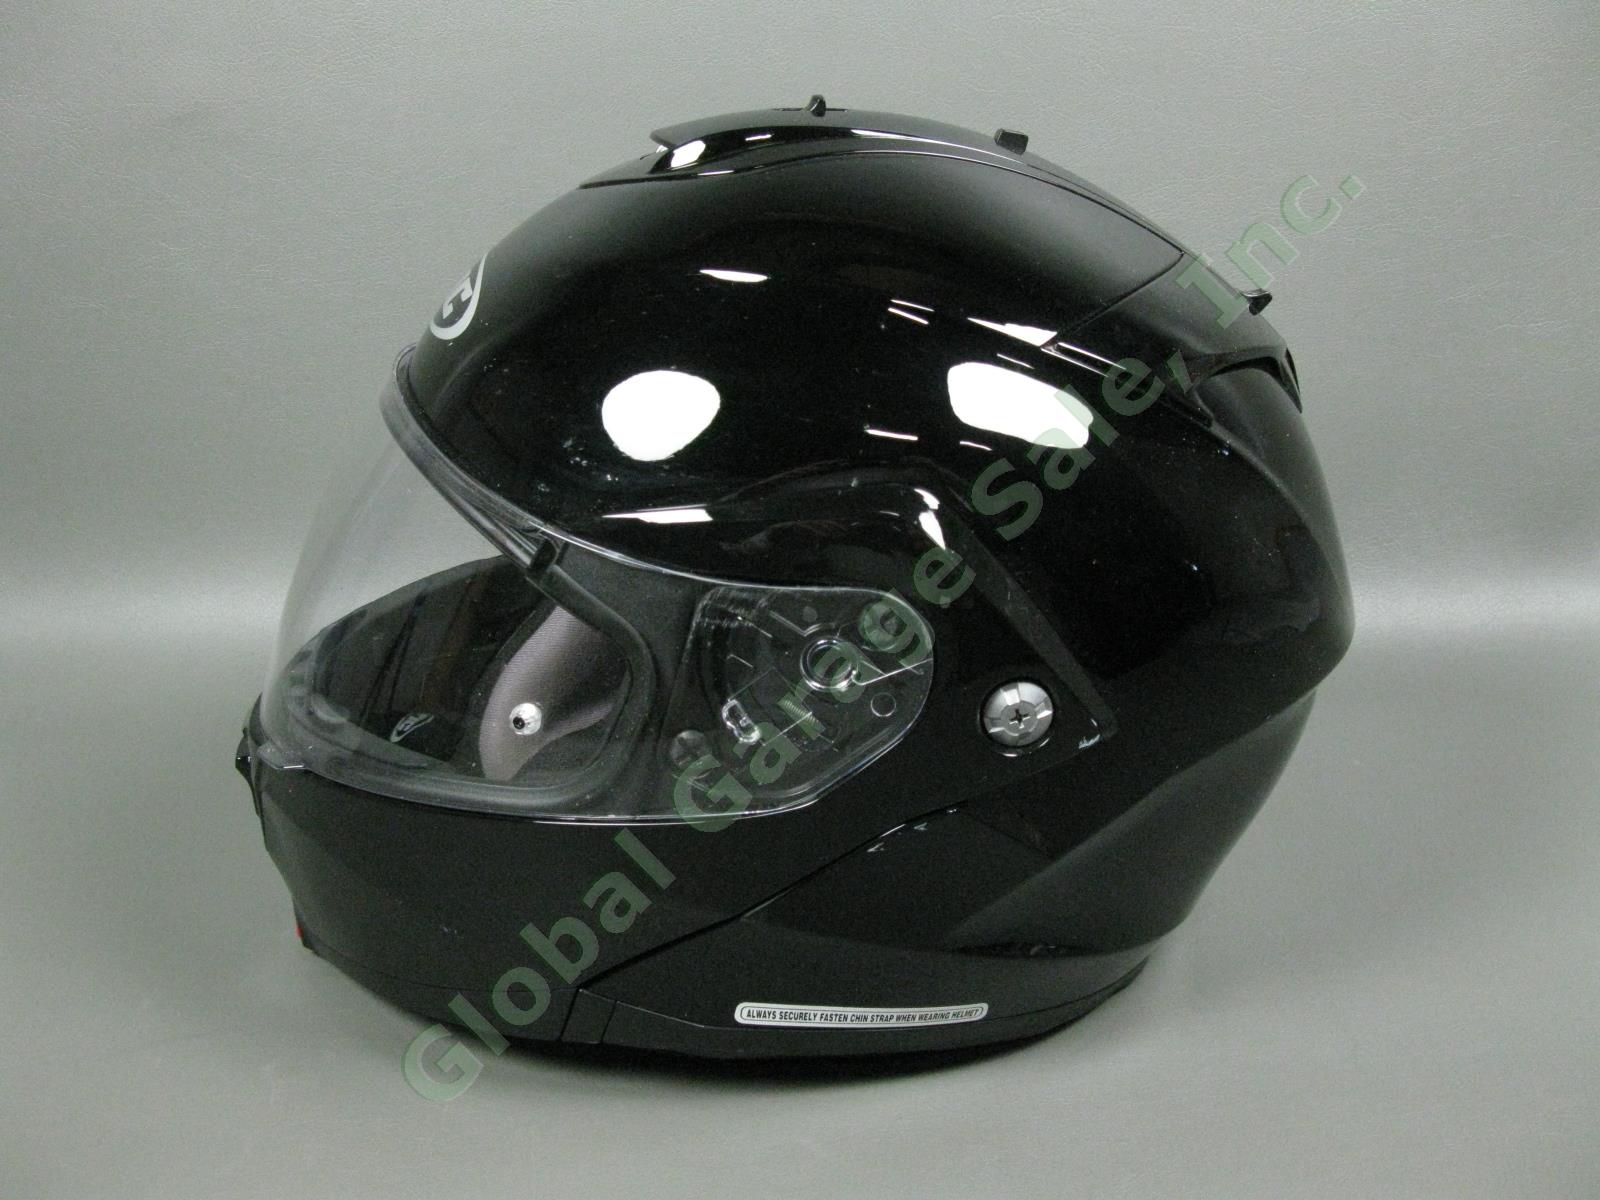 HJC IS-Max II Modular Motorcycle Helmet Size XXL Black Gloss One Owner EXC COND! 2